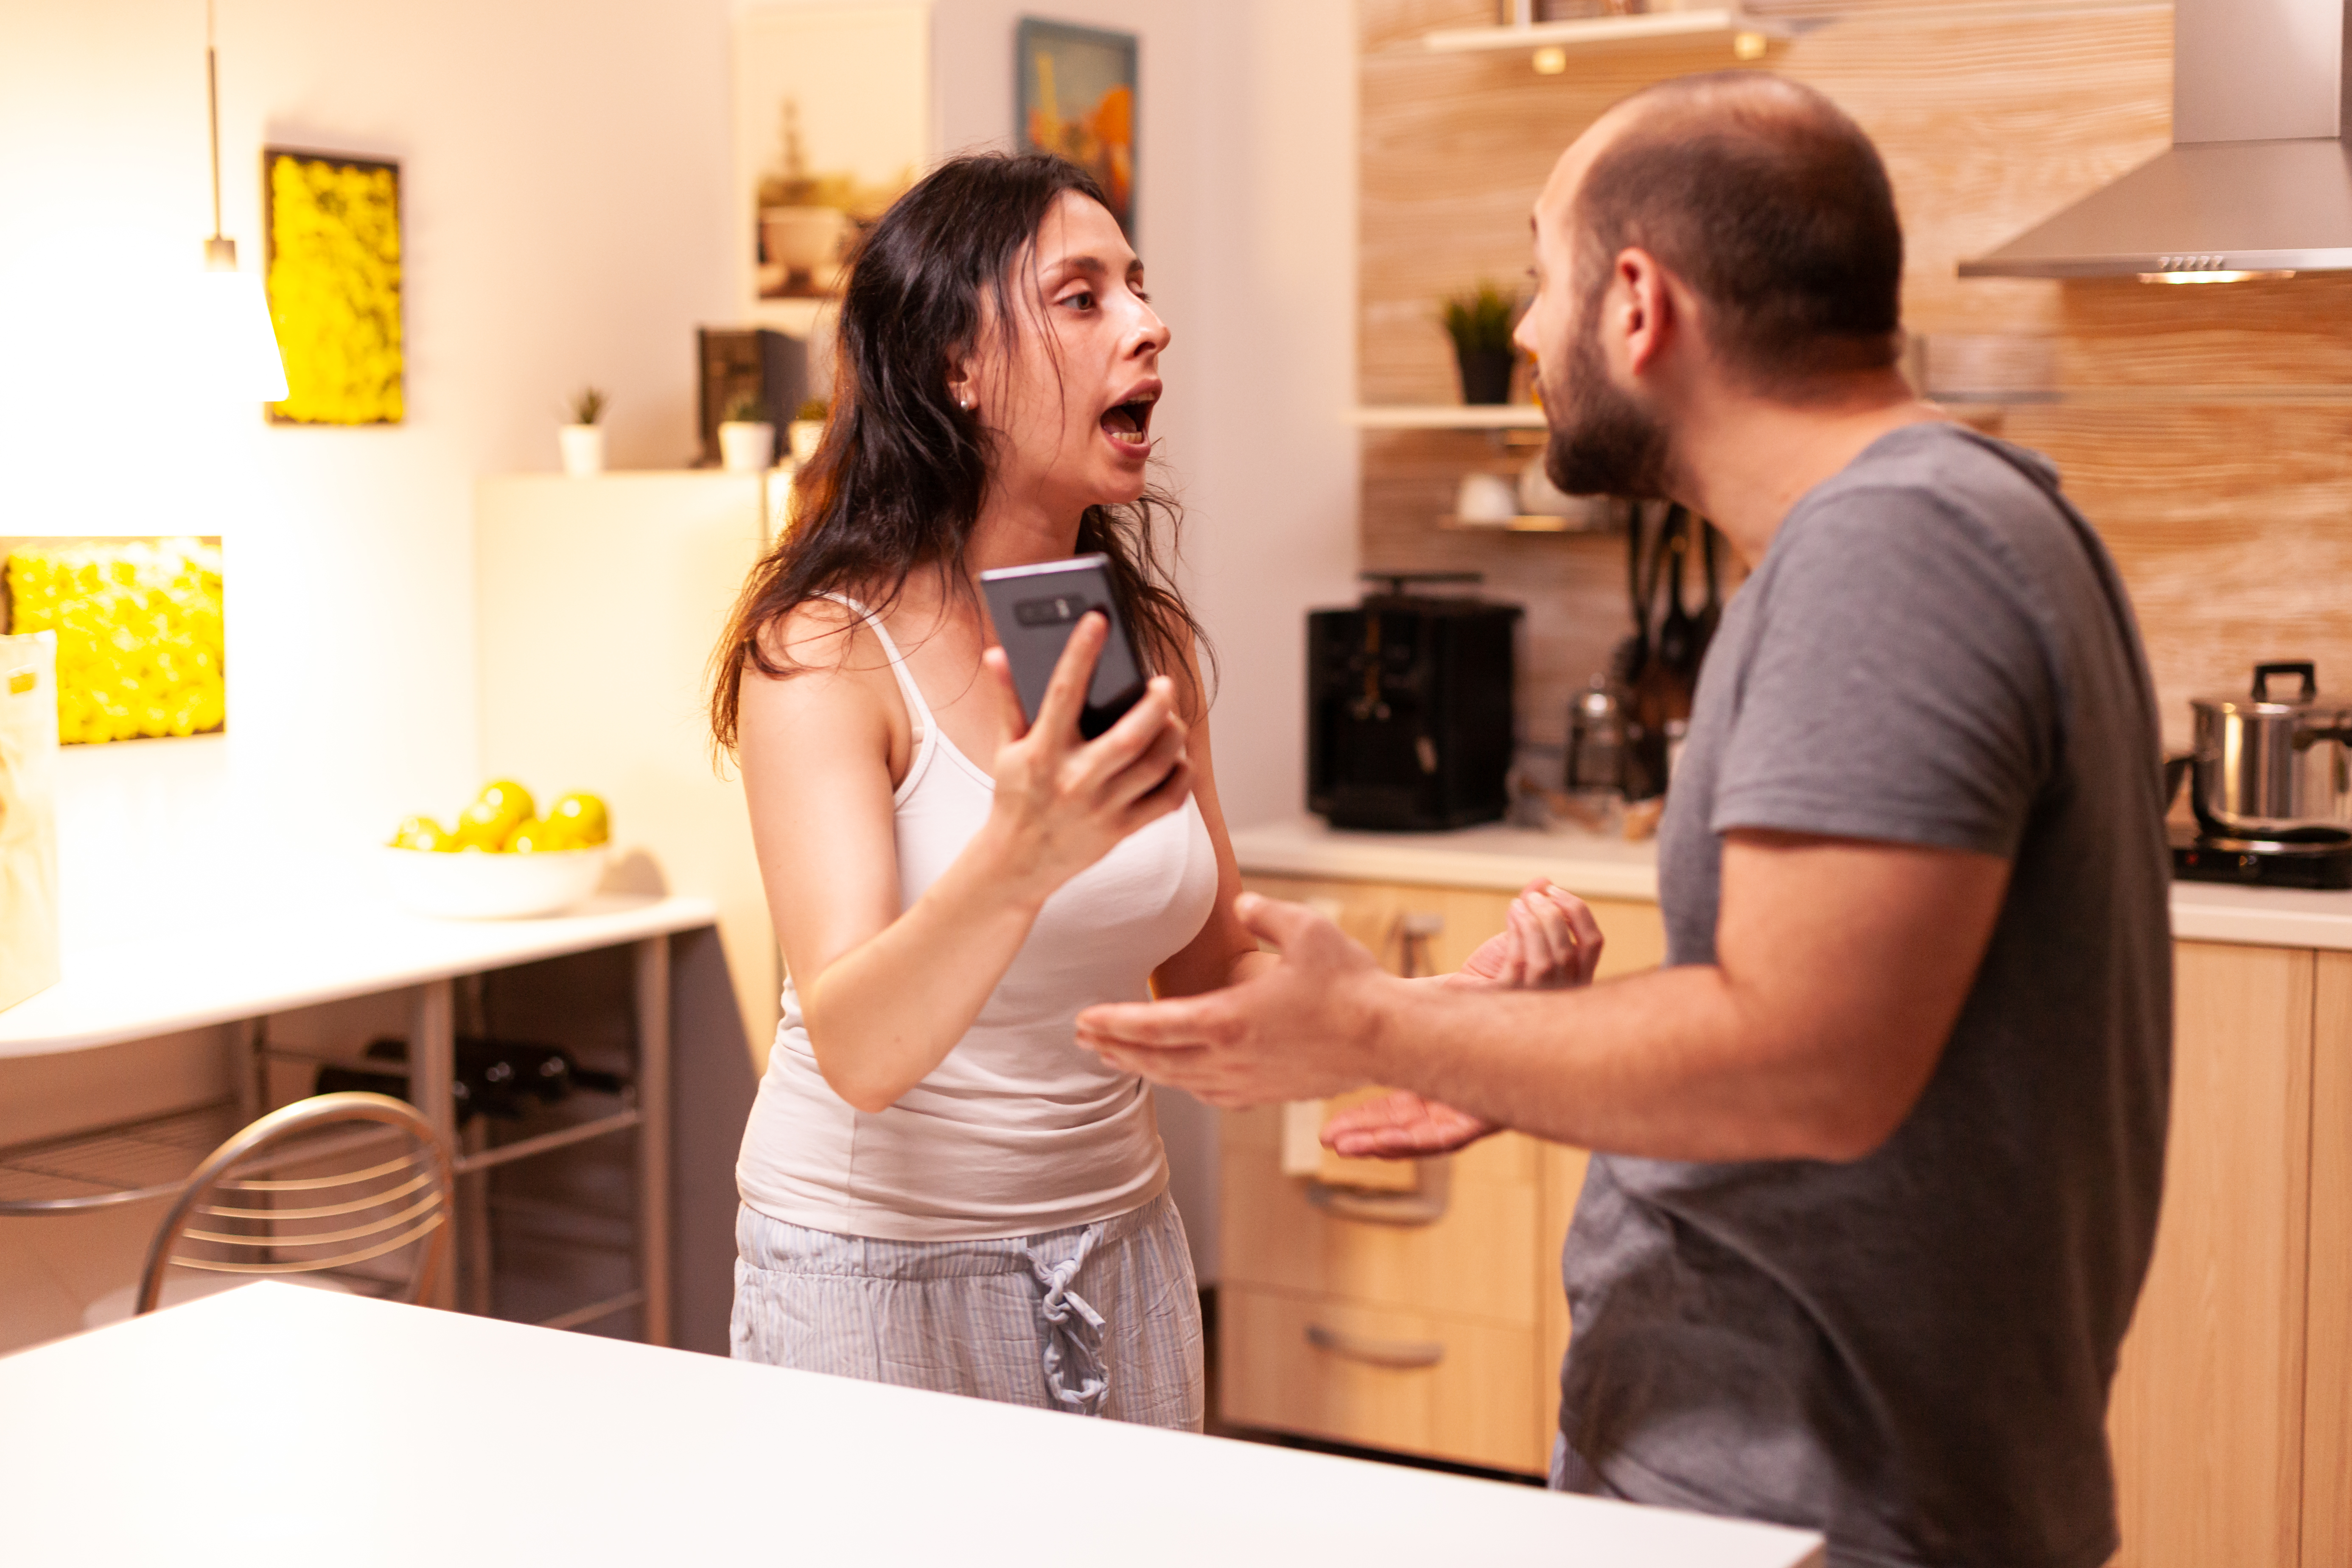 An angry wife demanding an explanation from her husband | Source: Shutterstock